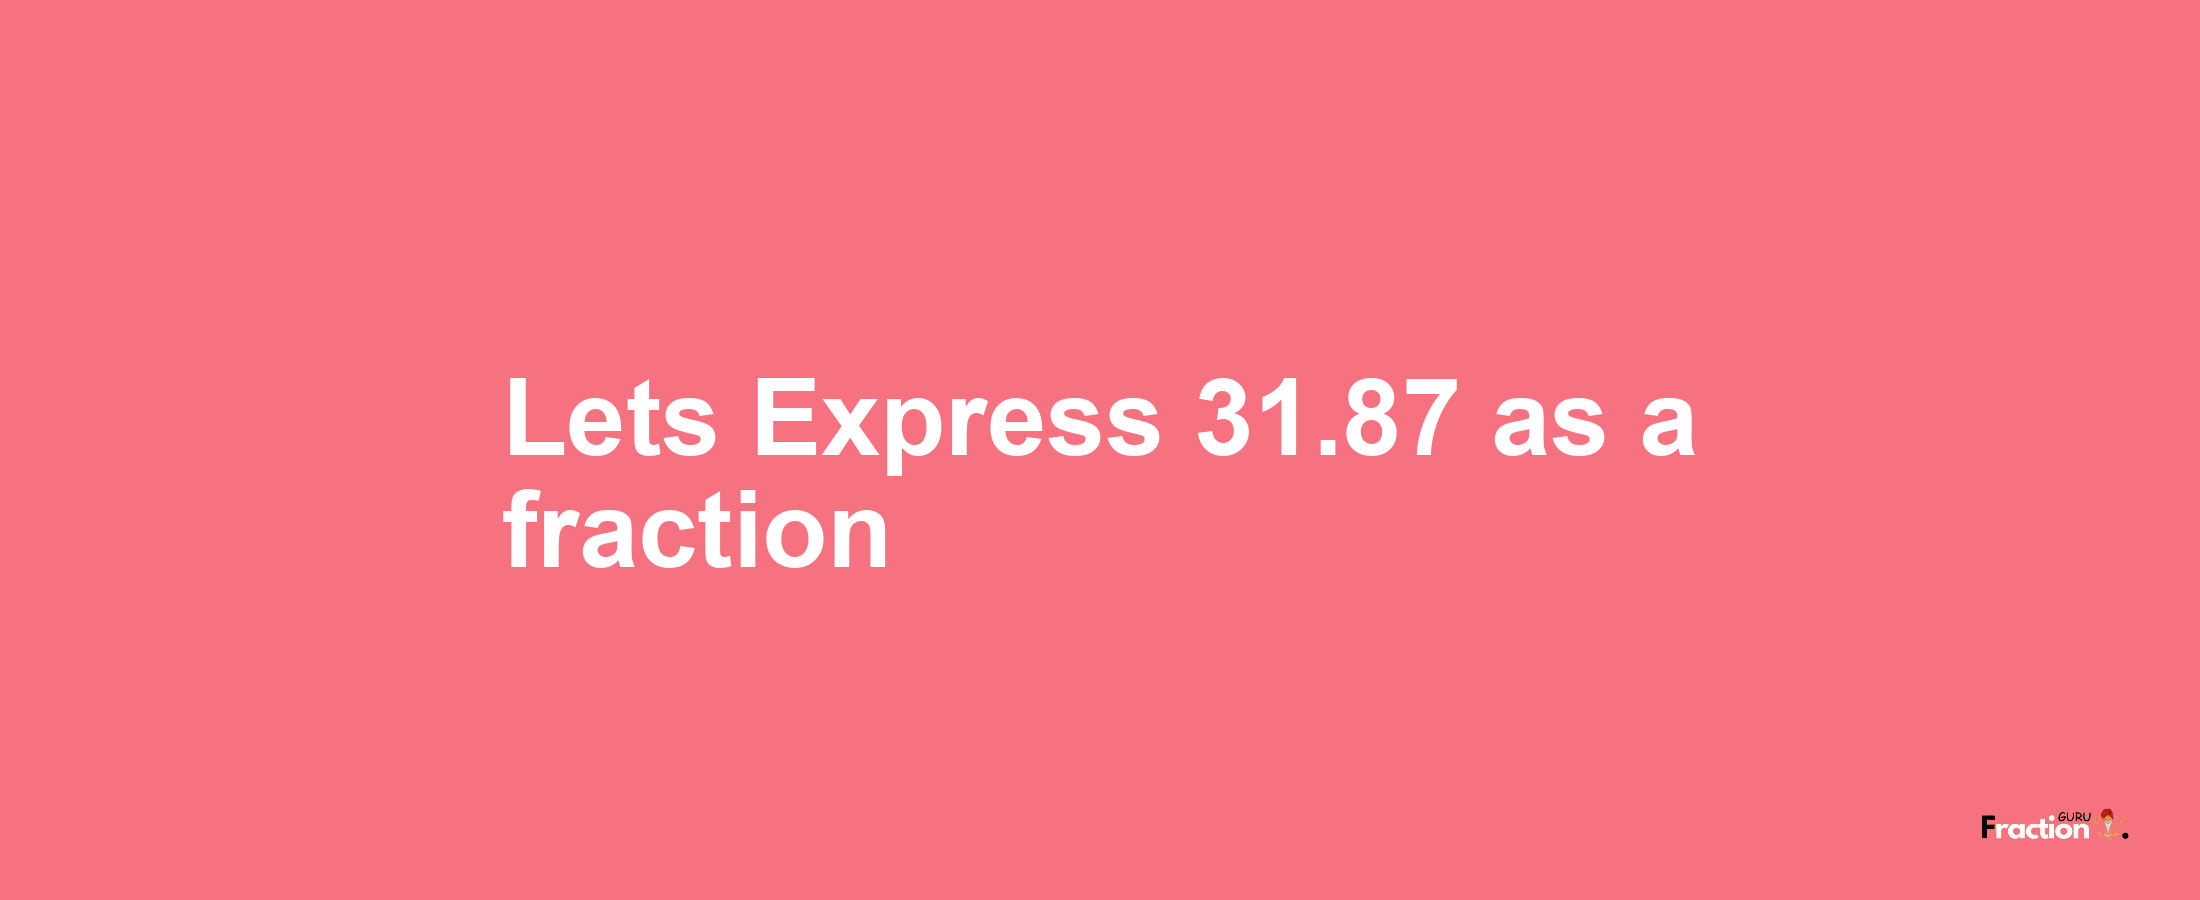 Lets Express 31.87 as afraction